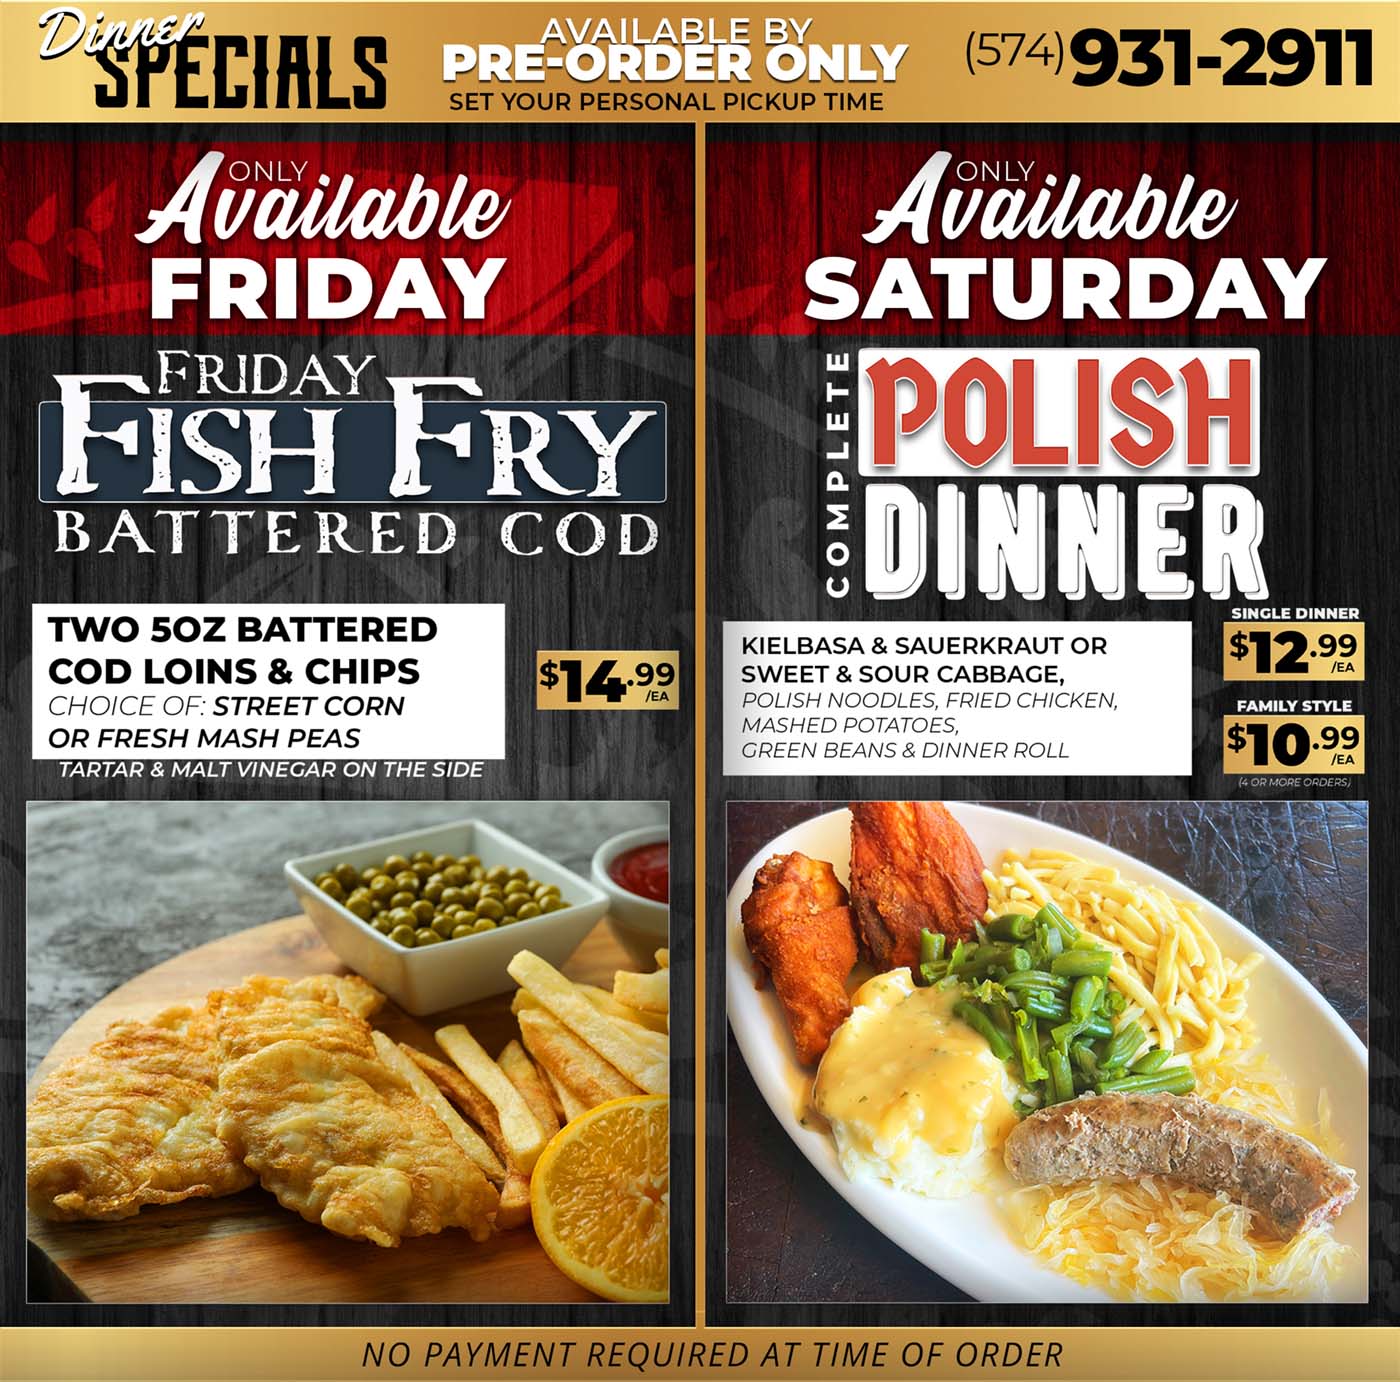 Friday and Saturday Dinner Specials